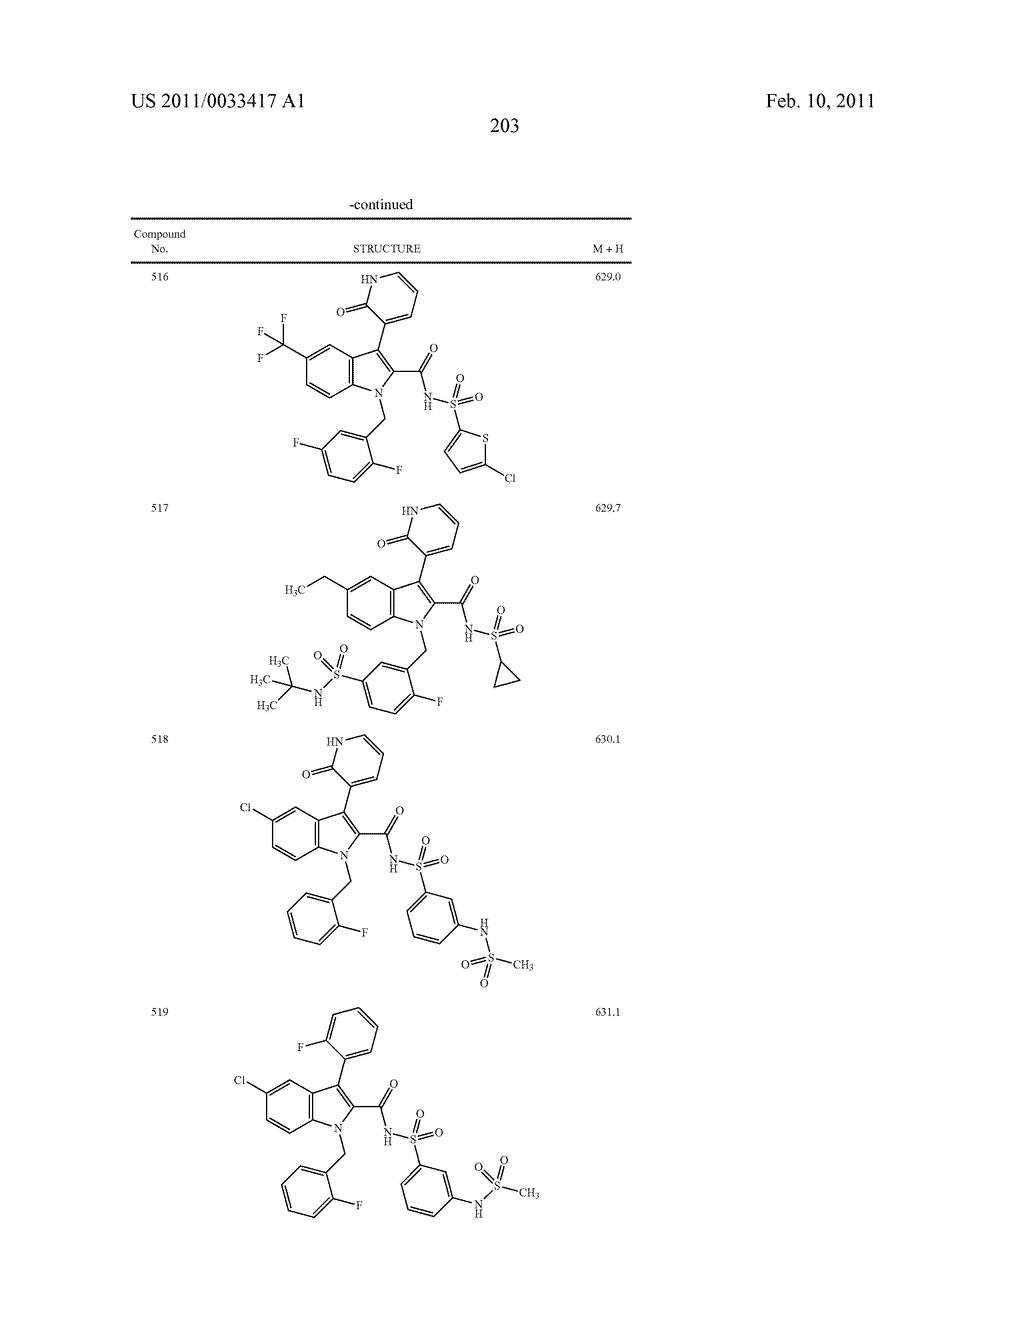 2,3-SUBSTITUTED INDOLE DERIVATIVES FOR TREATING VIRAL INFECTIONS - diagram, schematic, and image 204